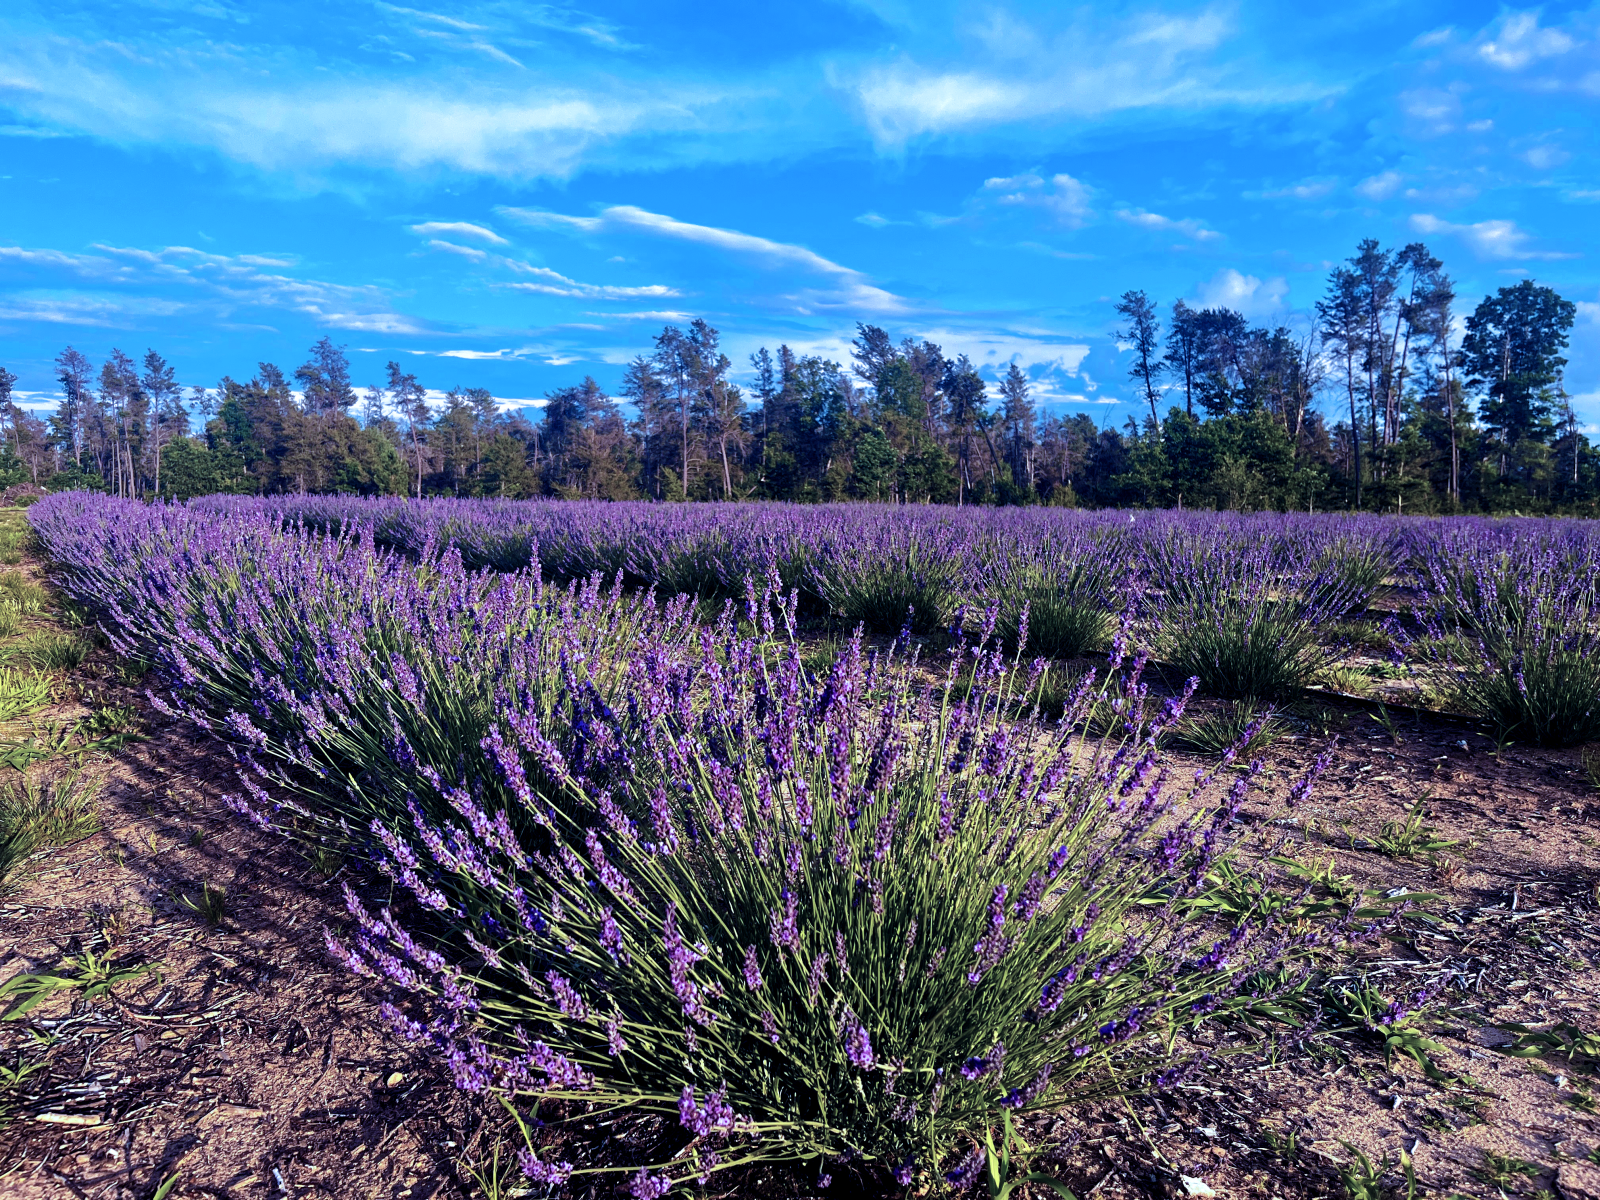 A breathtaking view of the Lavender Fields at The Uncommon Ranch, bathed in the vibrant colors of full bloom.